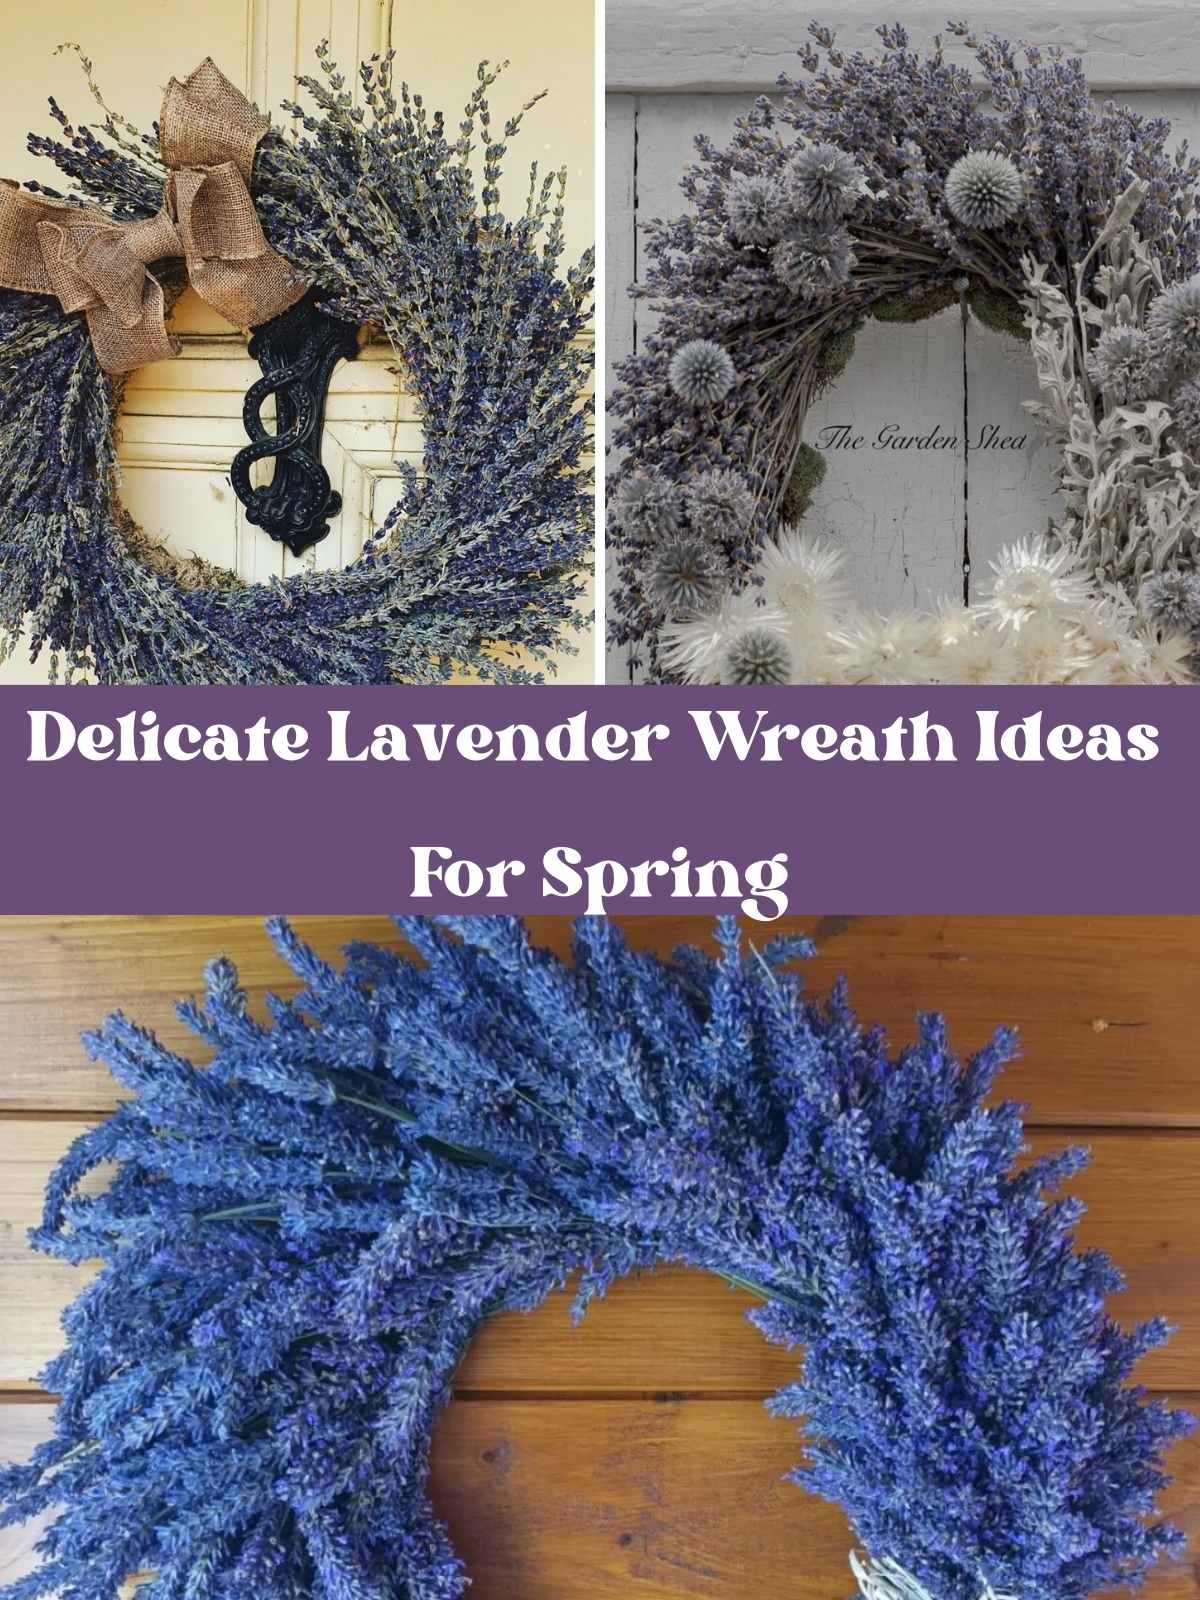 Delicate Lavender Wreath Ideas For Spring with 3 dark purple examples.